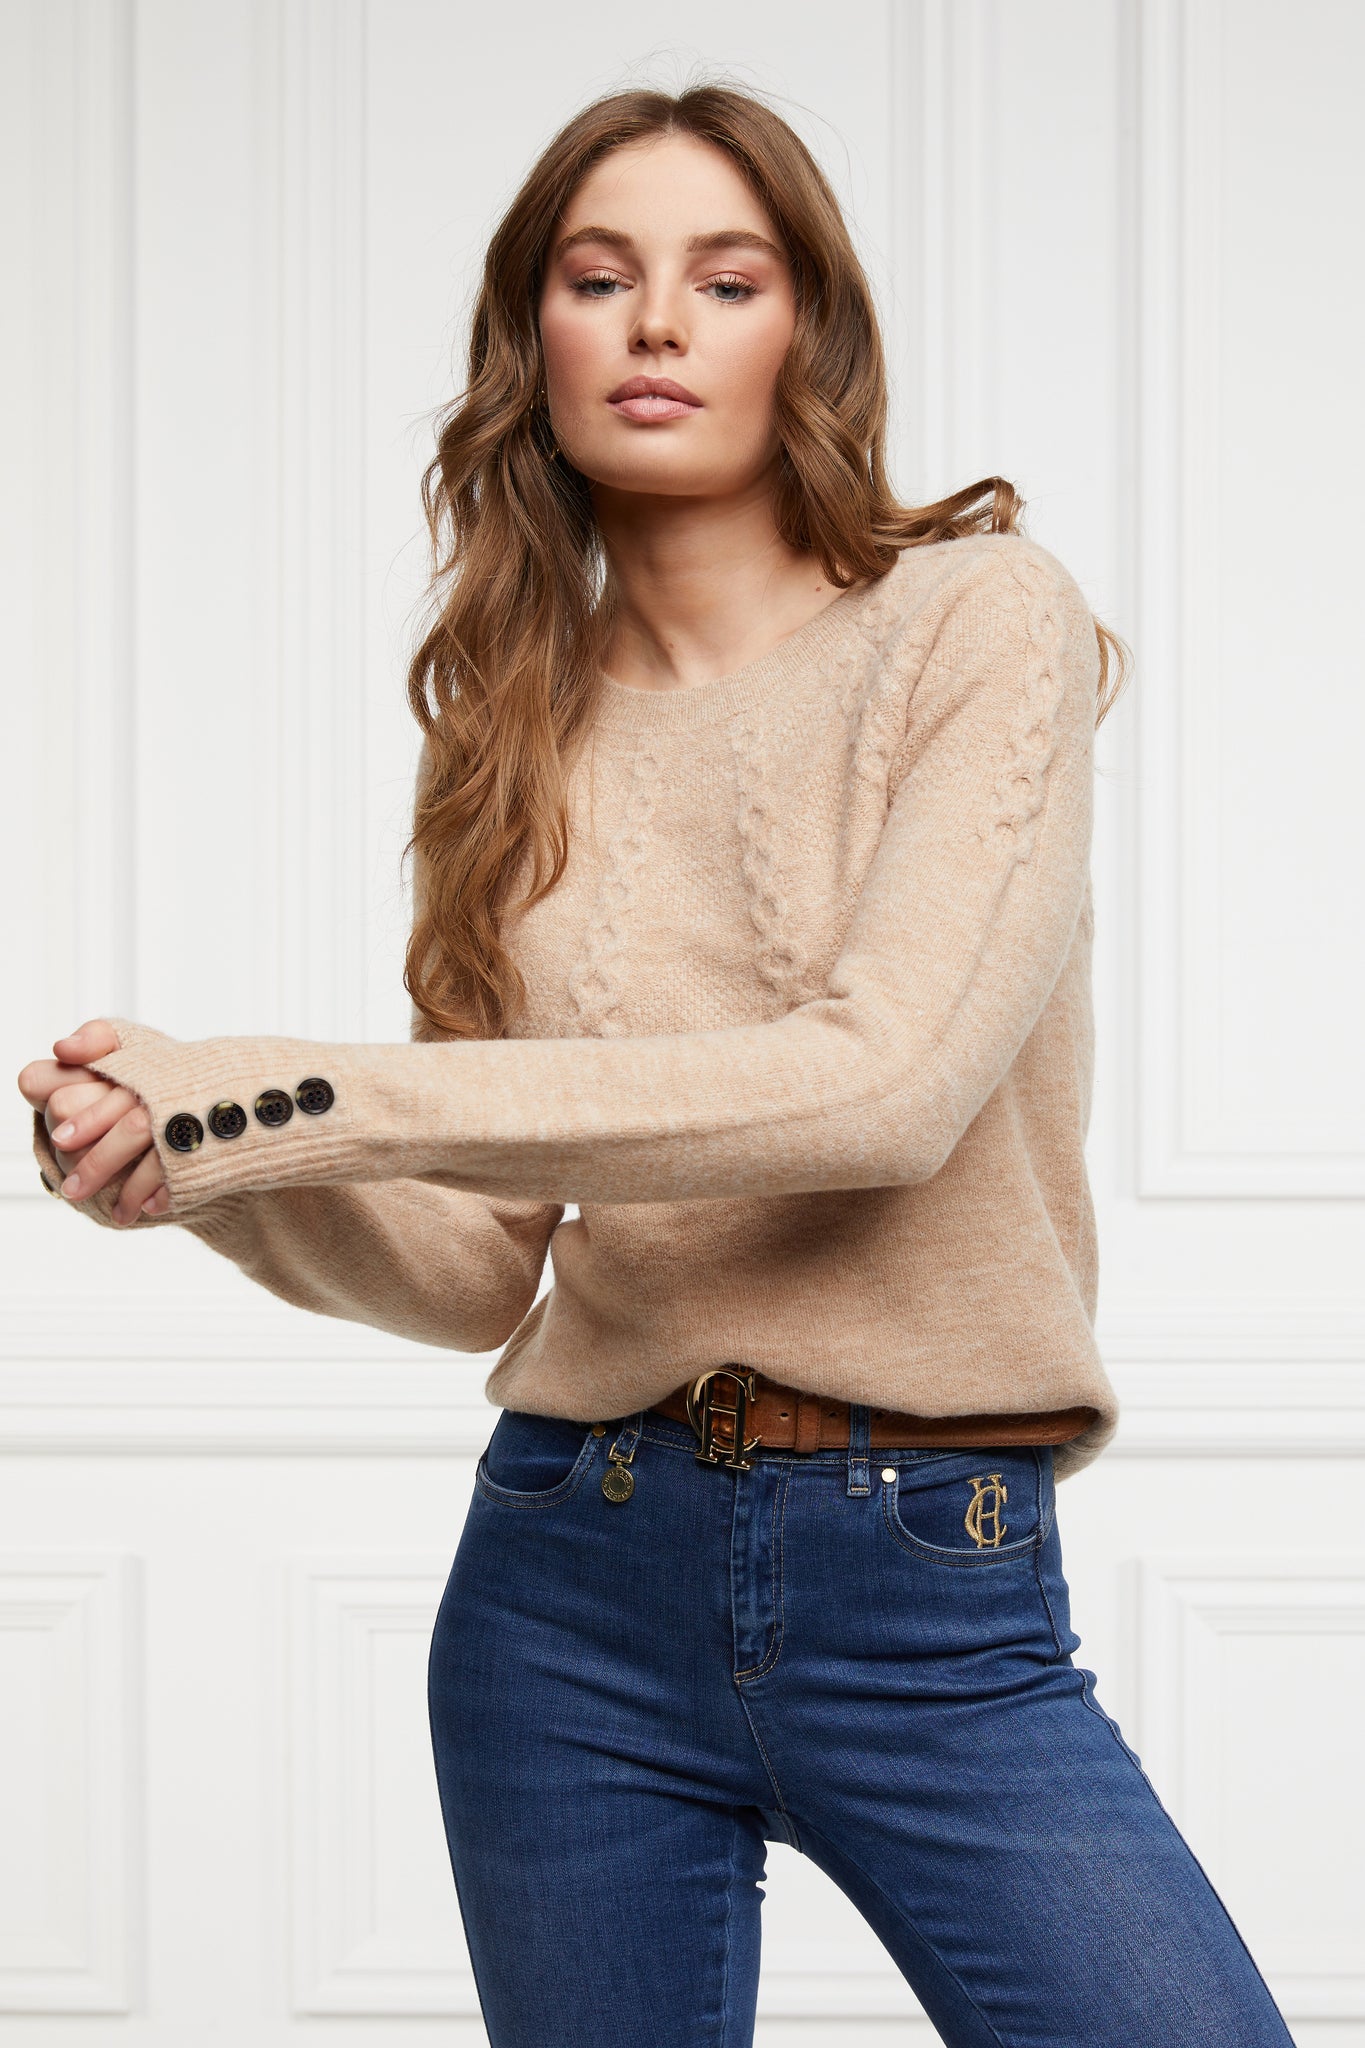 womens chunky knit crew neck jumper in camel with half cable knit knit detailing and horn buttons across cuffs 